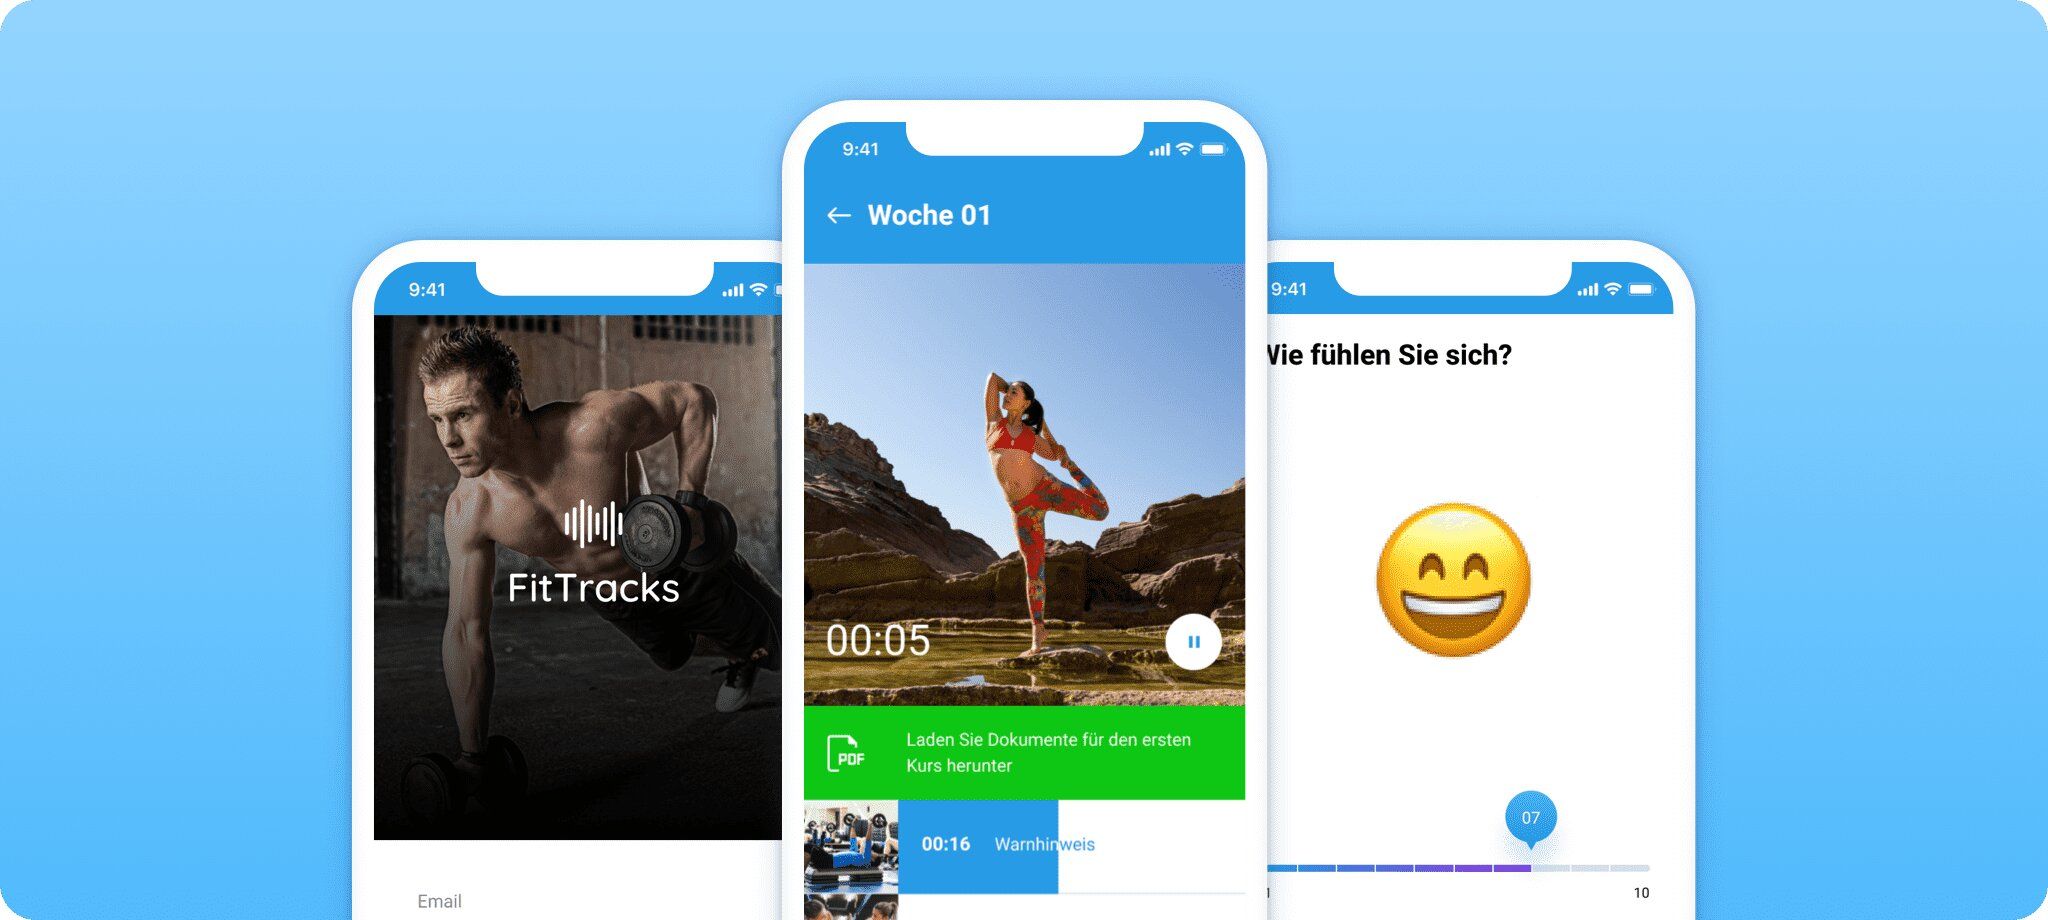 A fitness health app can be combined with healthcare mobile app development (shots from (*image by [Stormotion](https://stormotion.io/product/fit-tracks/){ target="_blank" .default-md}*)